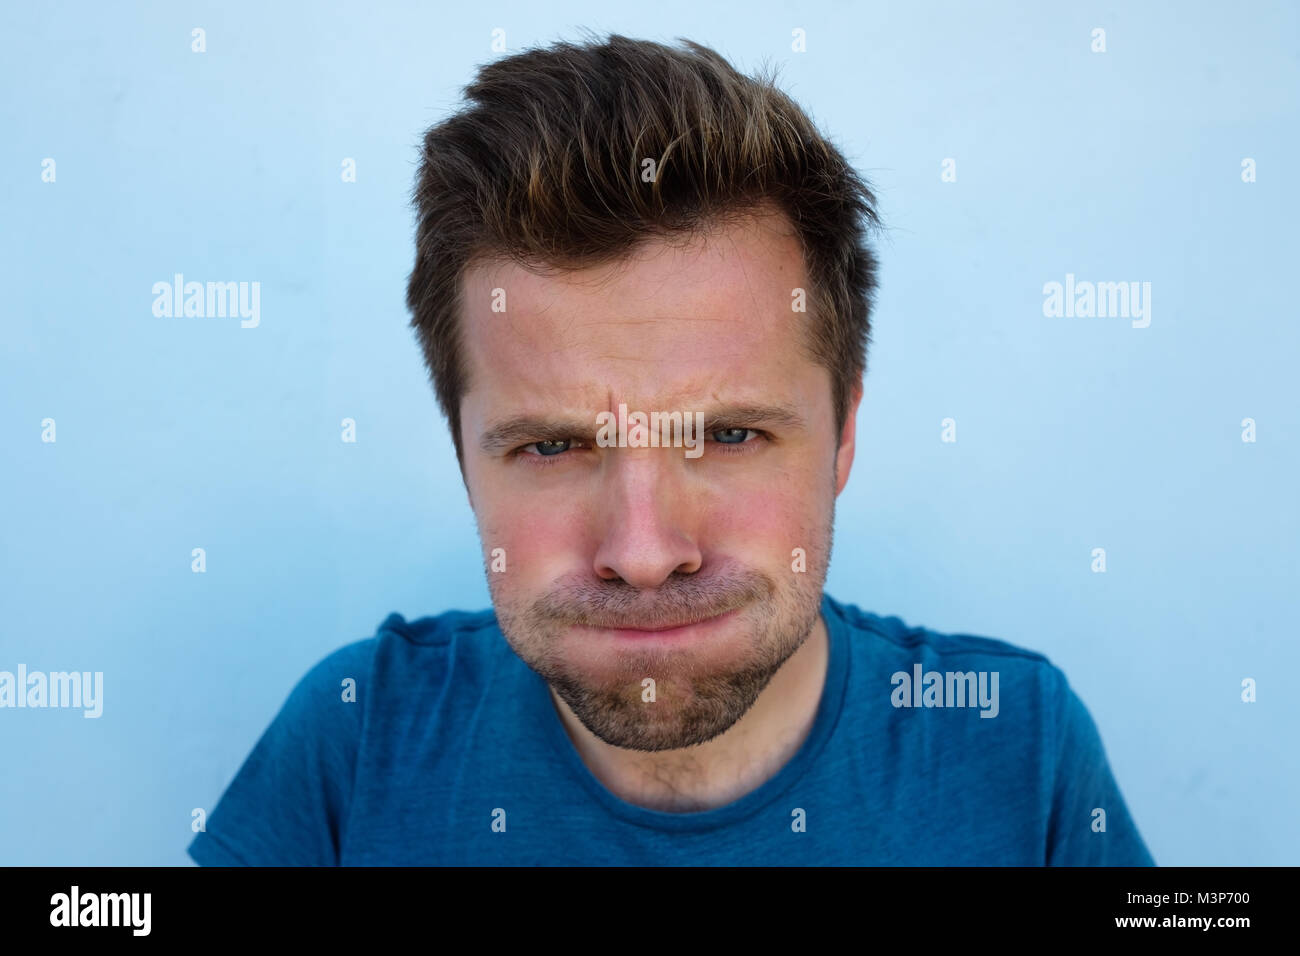 Humorous emotional portrait of grimacing young man Stock Photo